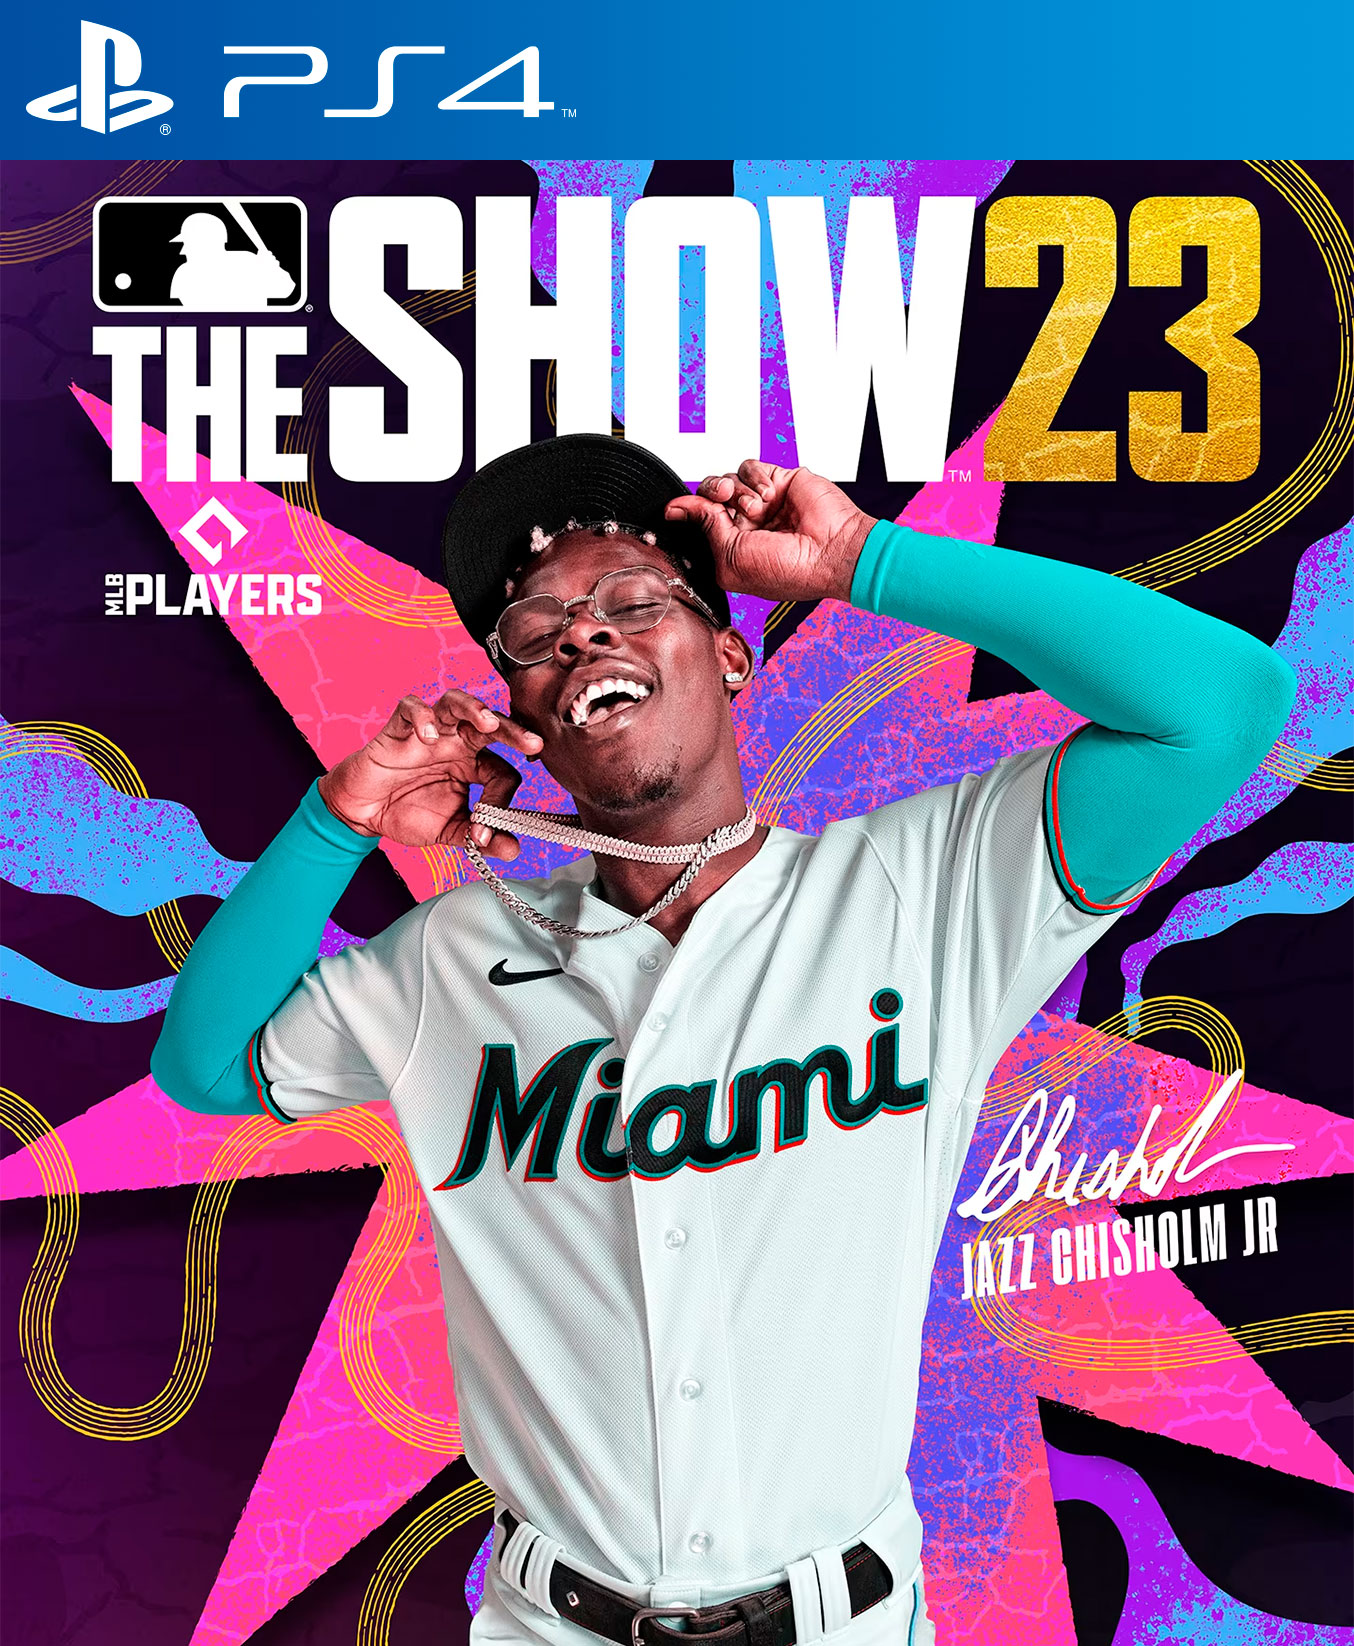 https://juegosdigitalescolombia.com/files/images/productos/1679961572-mlb-the-show-23-ps4-0.jpg